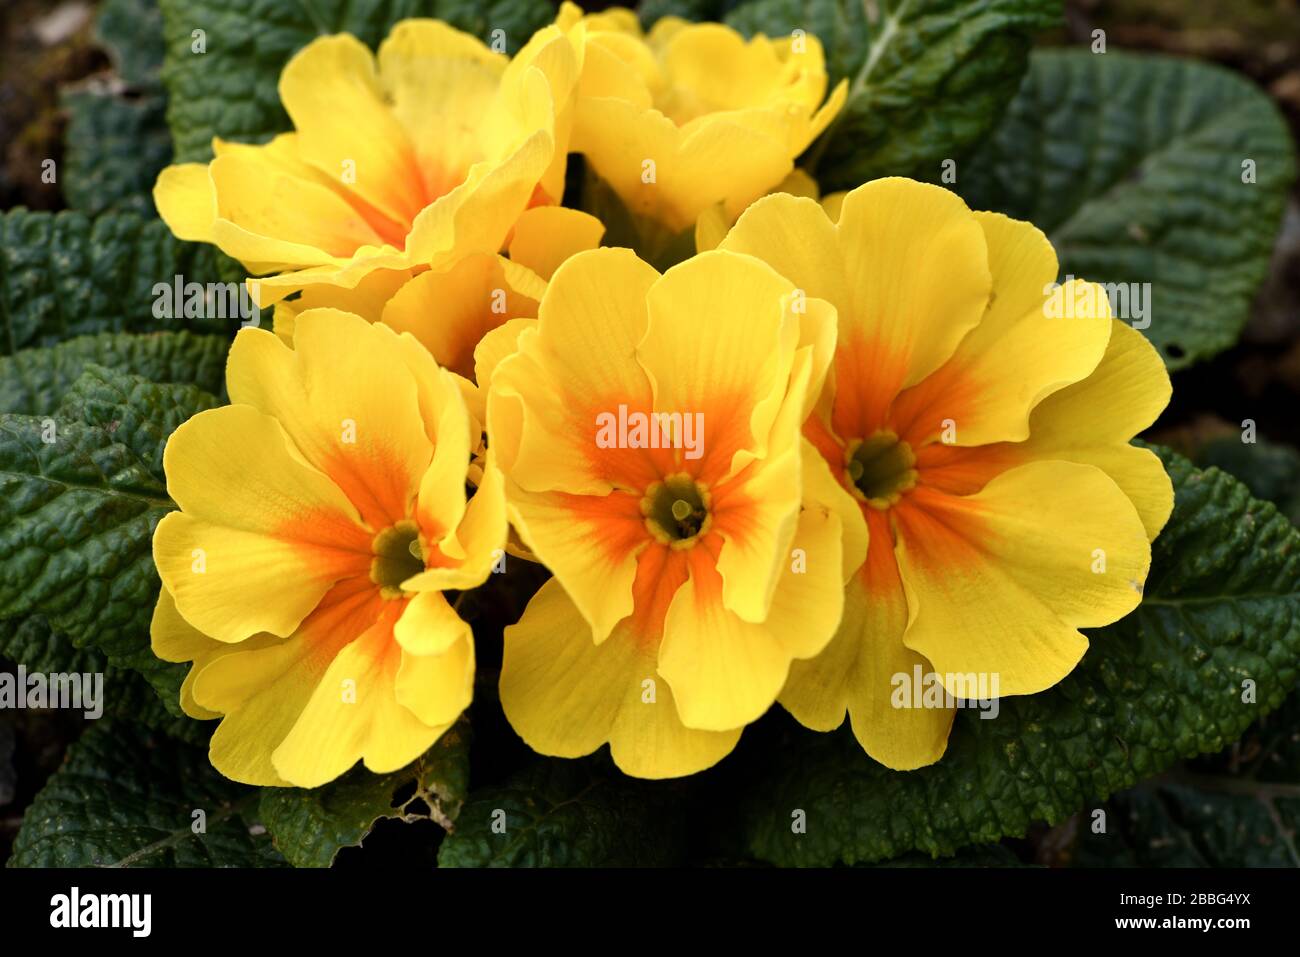 Closeup of a yellow primrose in flower. Stock Photo